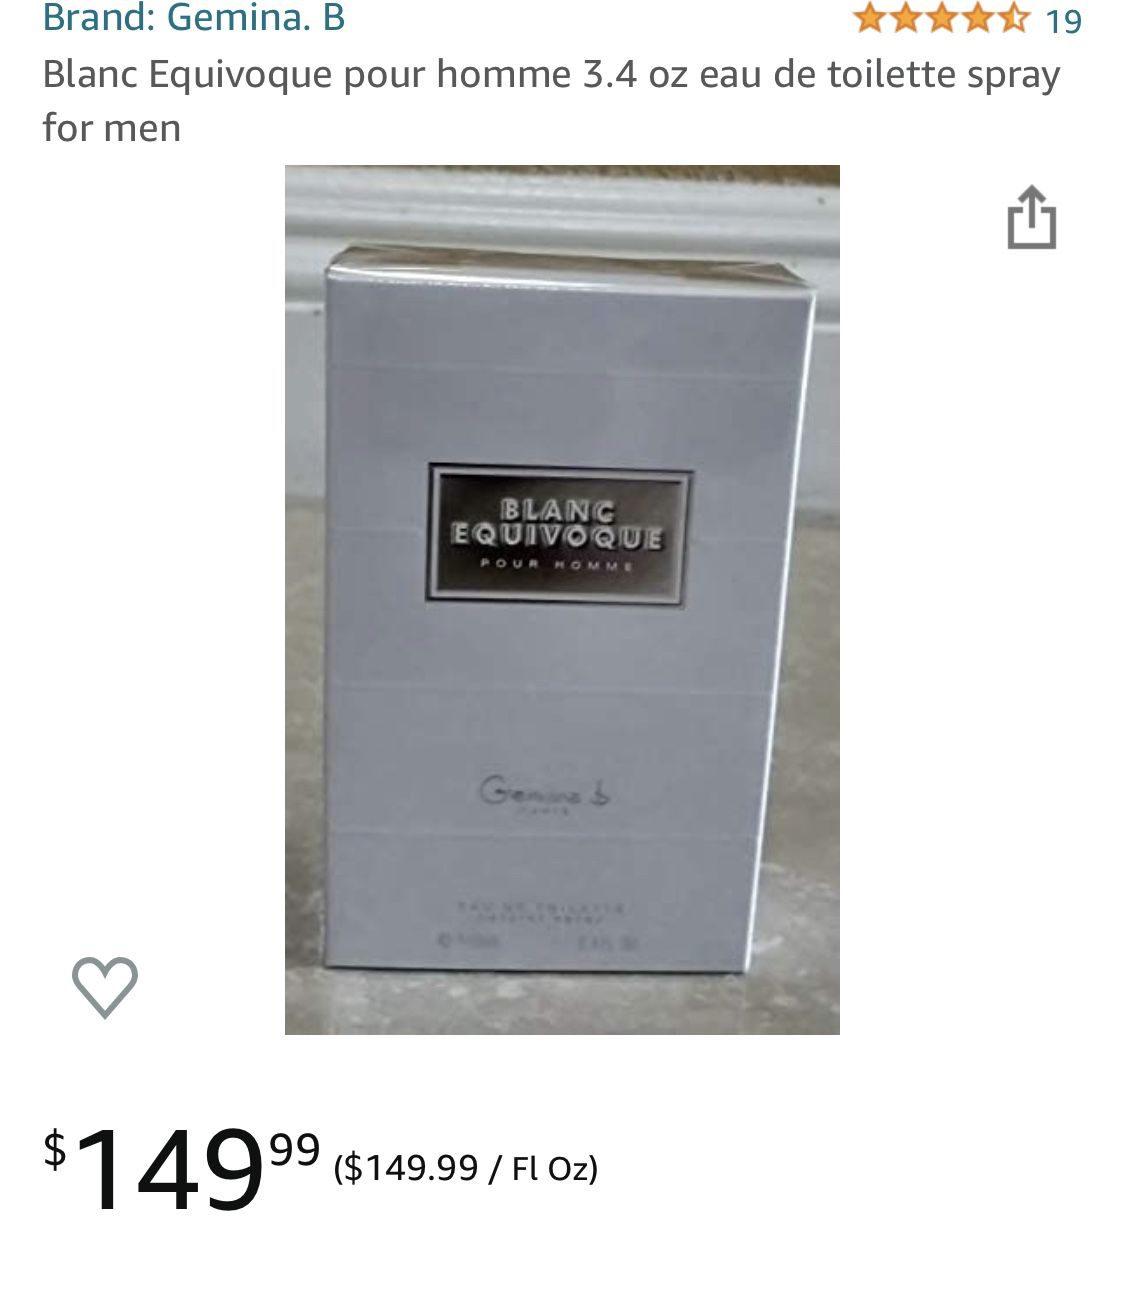 Louis Vuitton Mens Cologne for Sale in Anaheim, CA - OfferUp